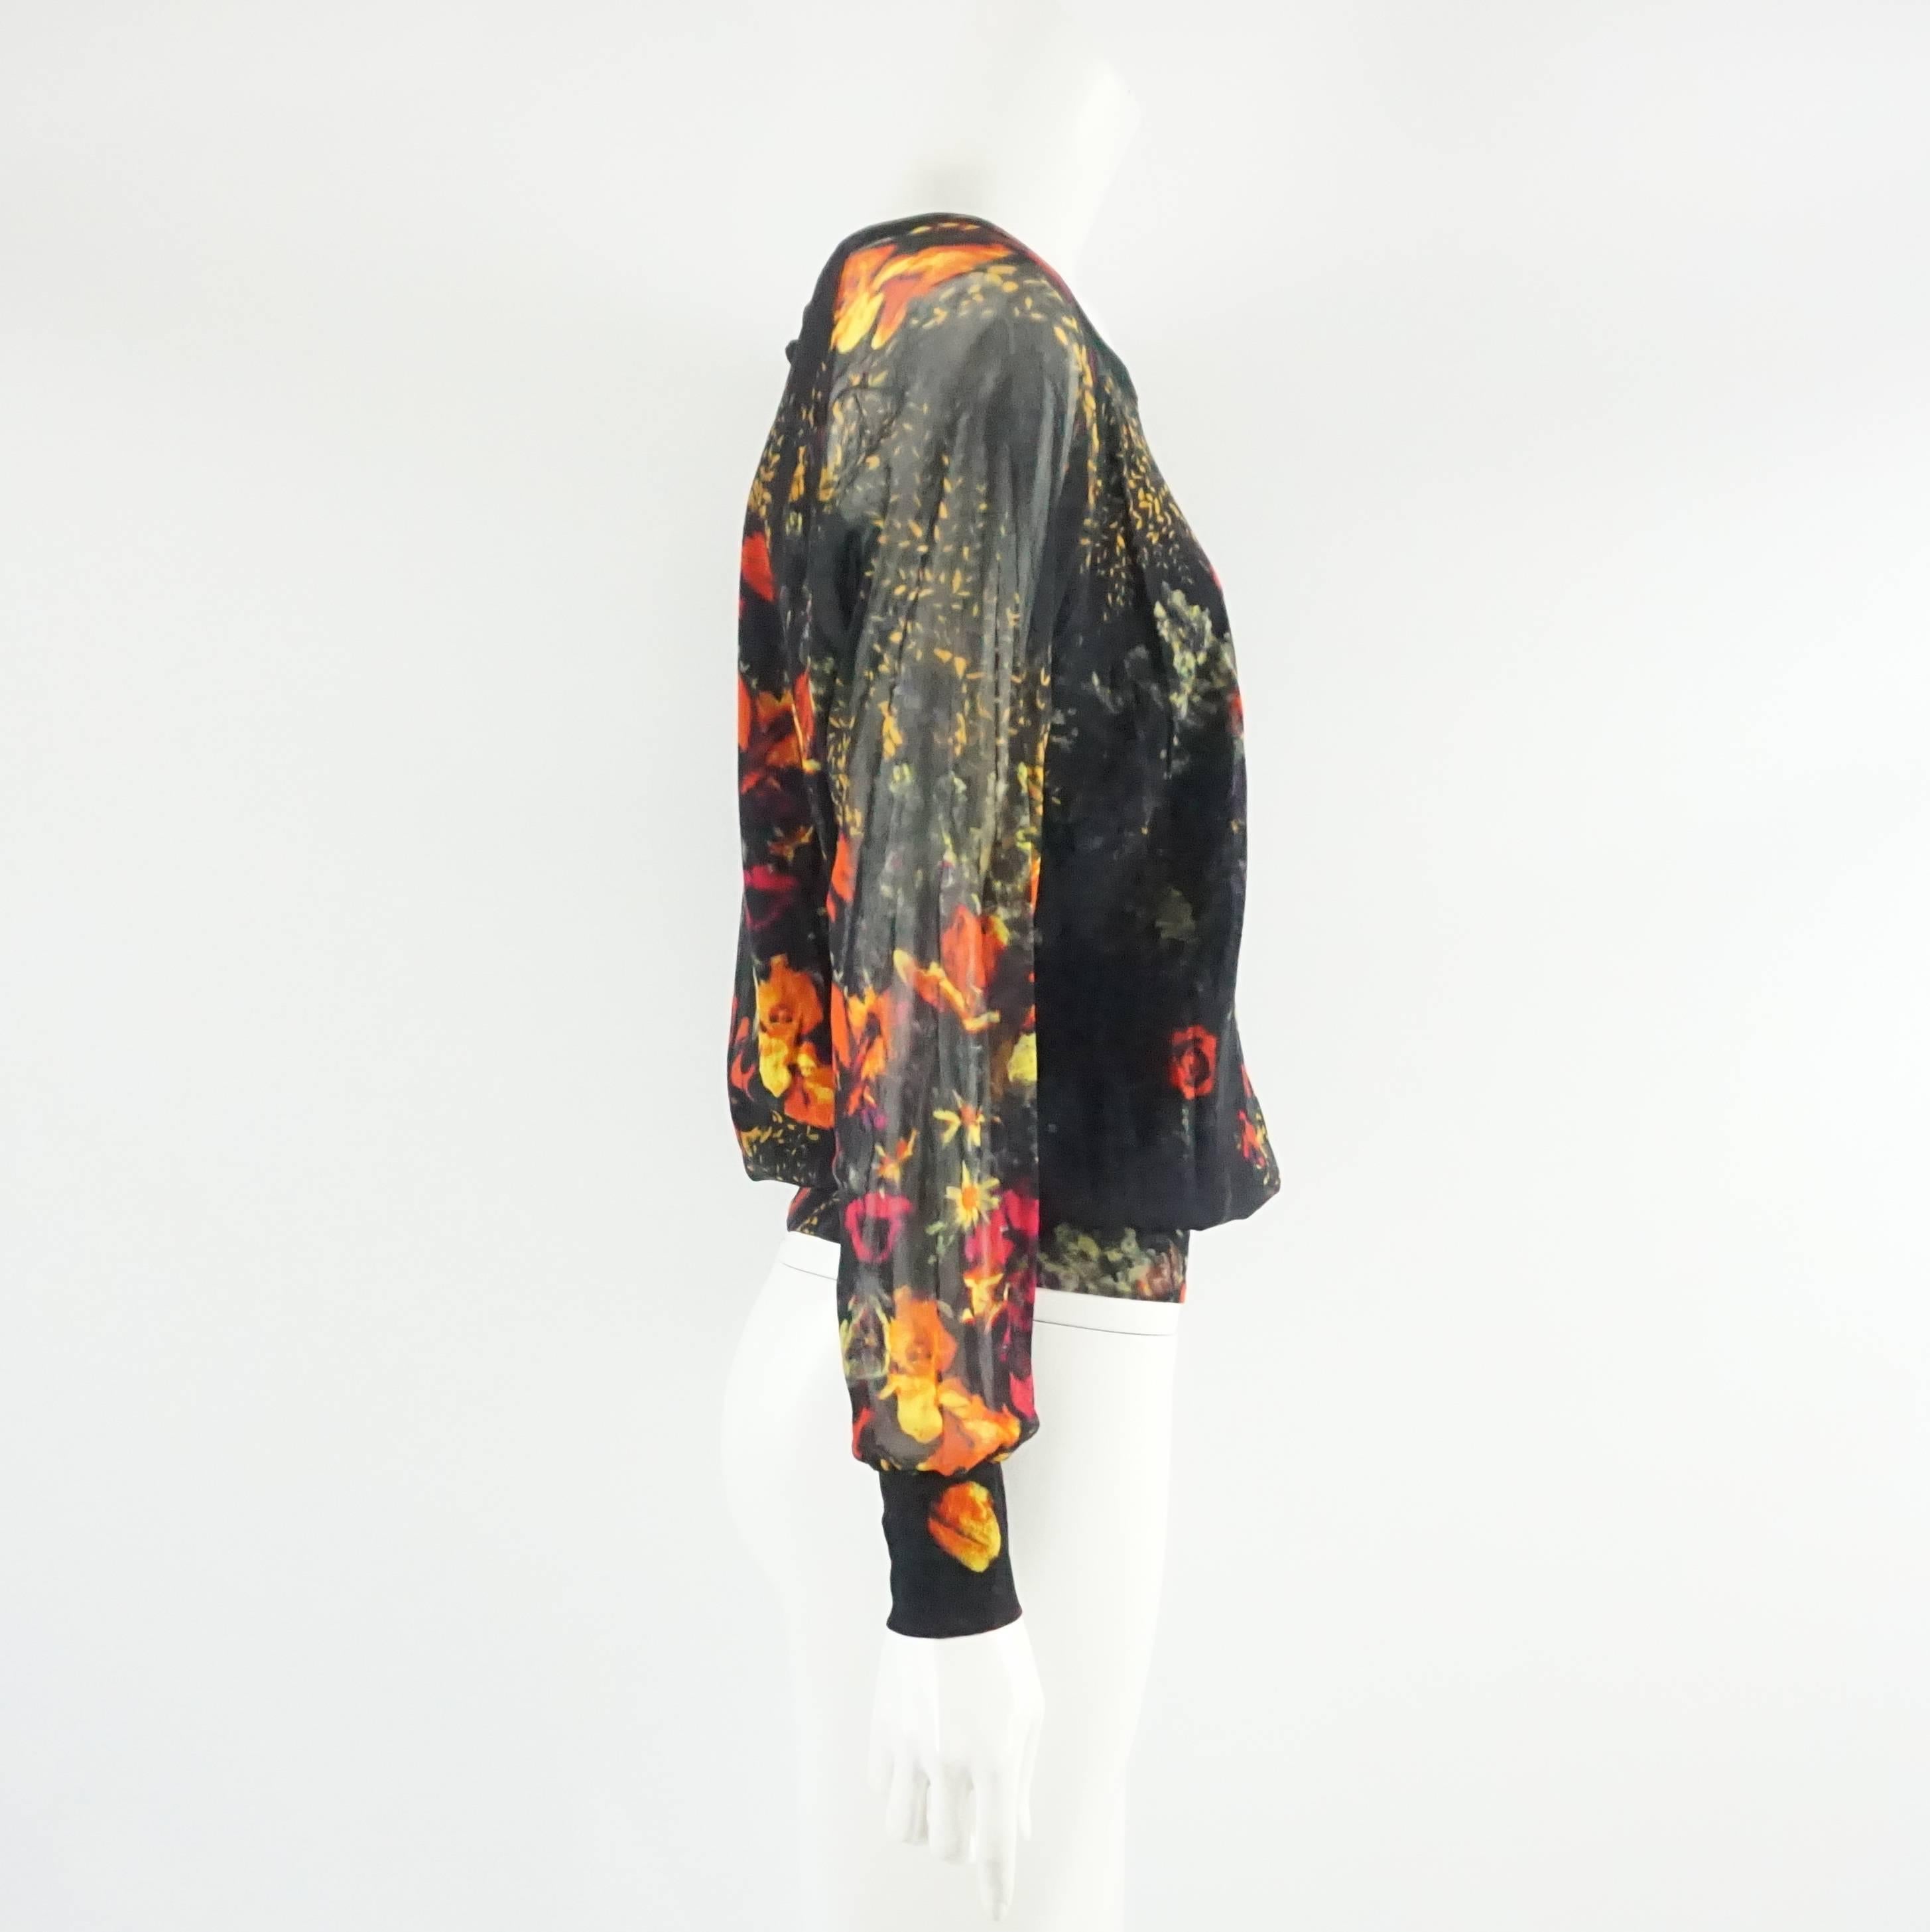 This Jean Paul Gaultier 90's top is black with a multi color floral print. The piece is long sleeved and is made of mesh with a interior black lining. It is in excellent vintage condition with minimal wear. Size S, circa 2000’s.